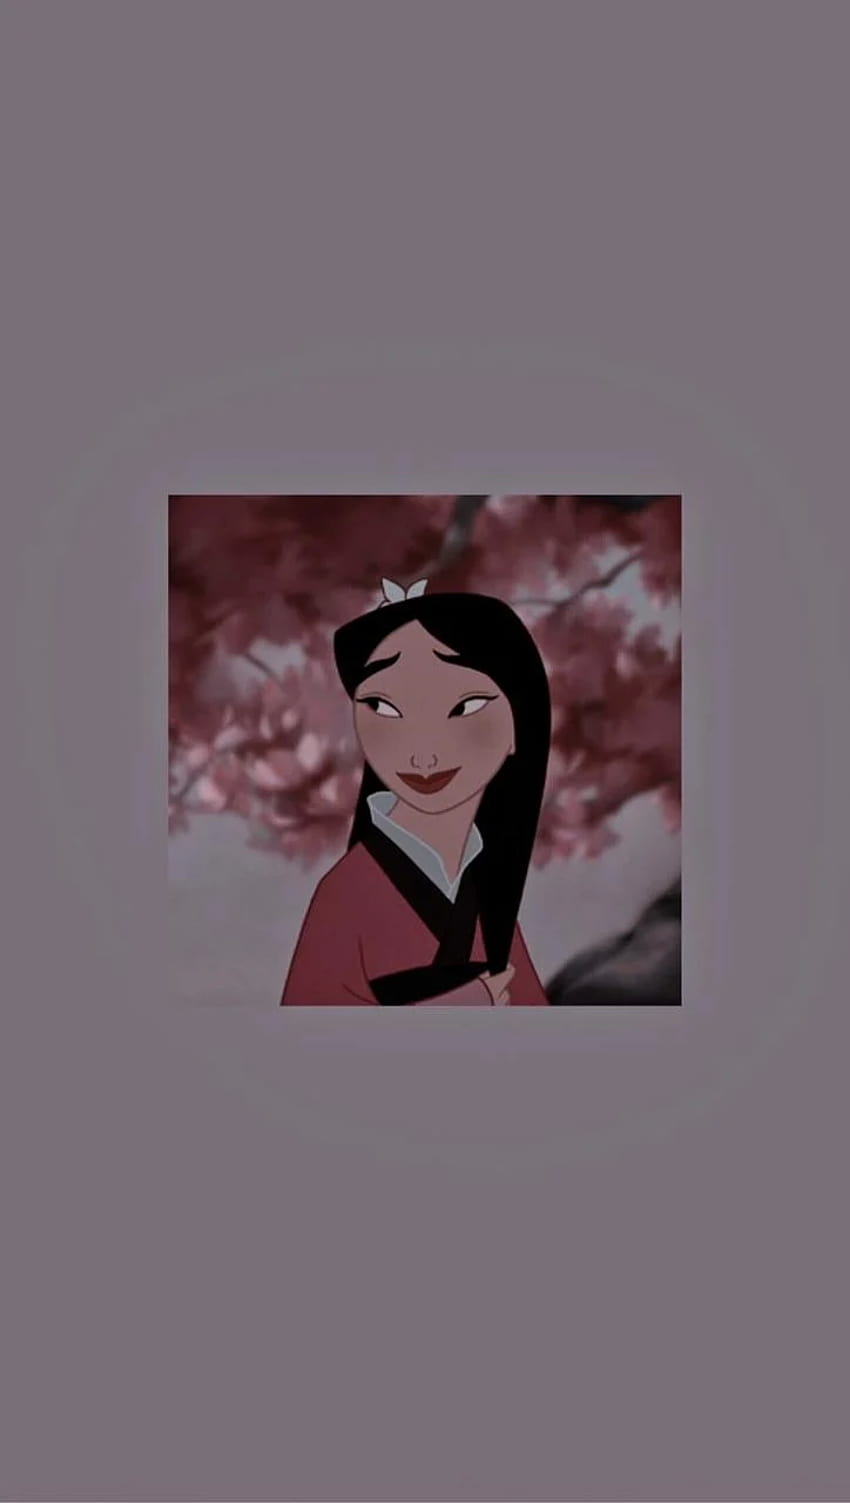 A picture of Mulan from the Disney movie Mulan. - Disney